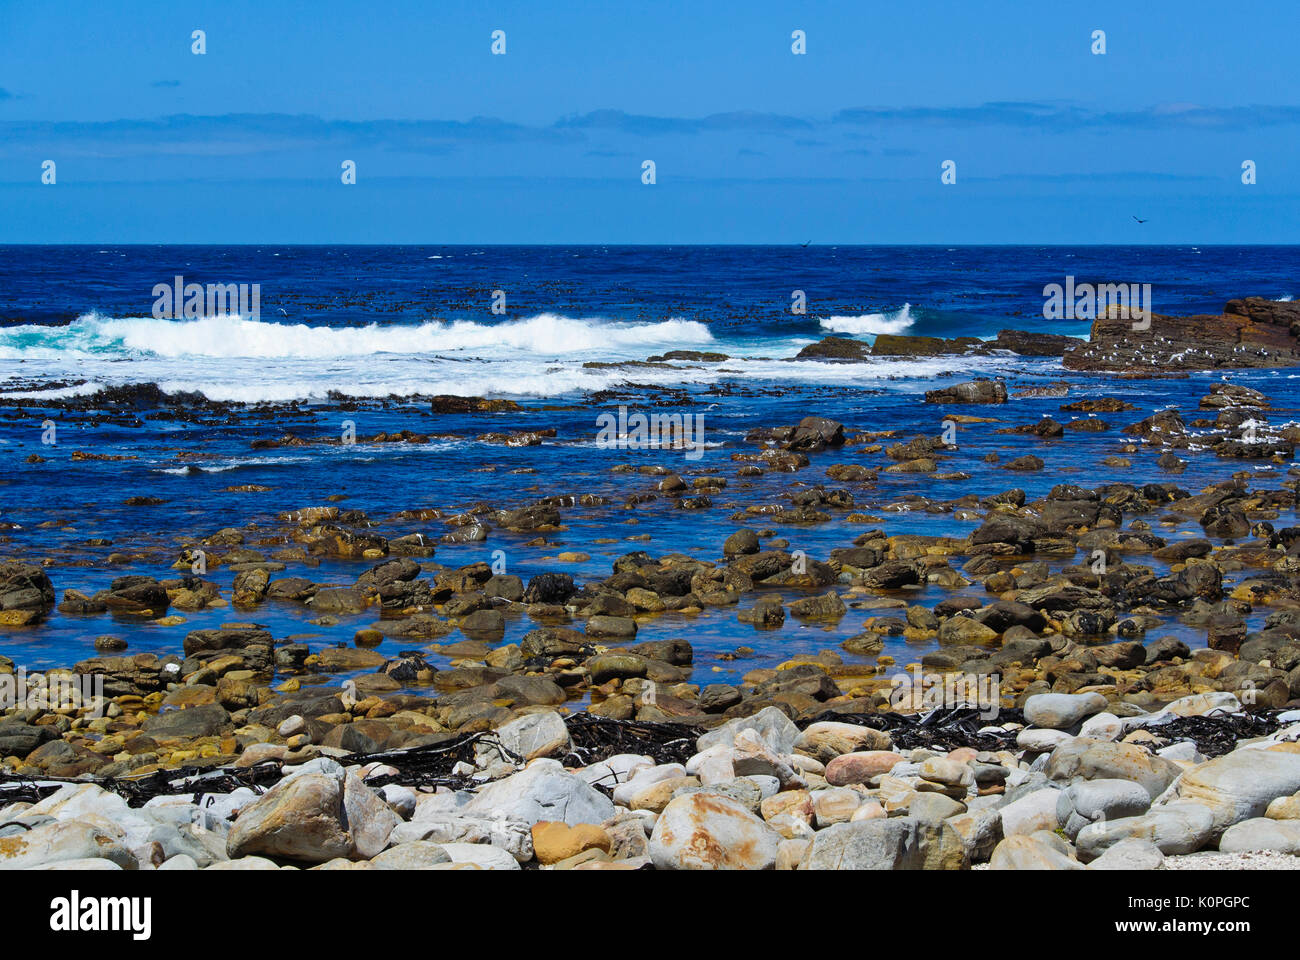 OCEAN WAVES CRASHING ONTO THE ROCKY SHORELINE WITH WASHED UP DRIED KELP PLANTS AT CAPE OF GOOD HOPE, SOUTH AFRICA Stock Photo